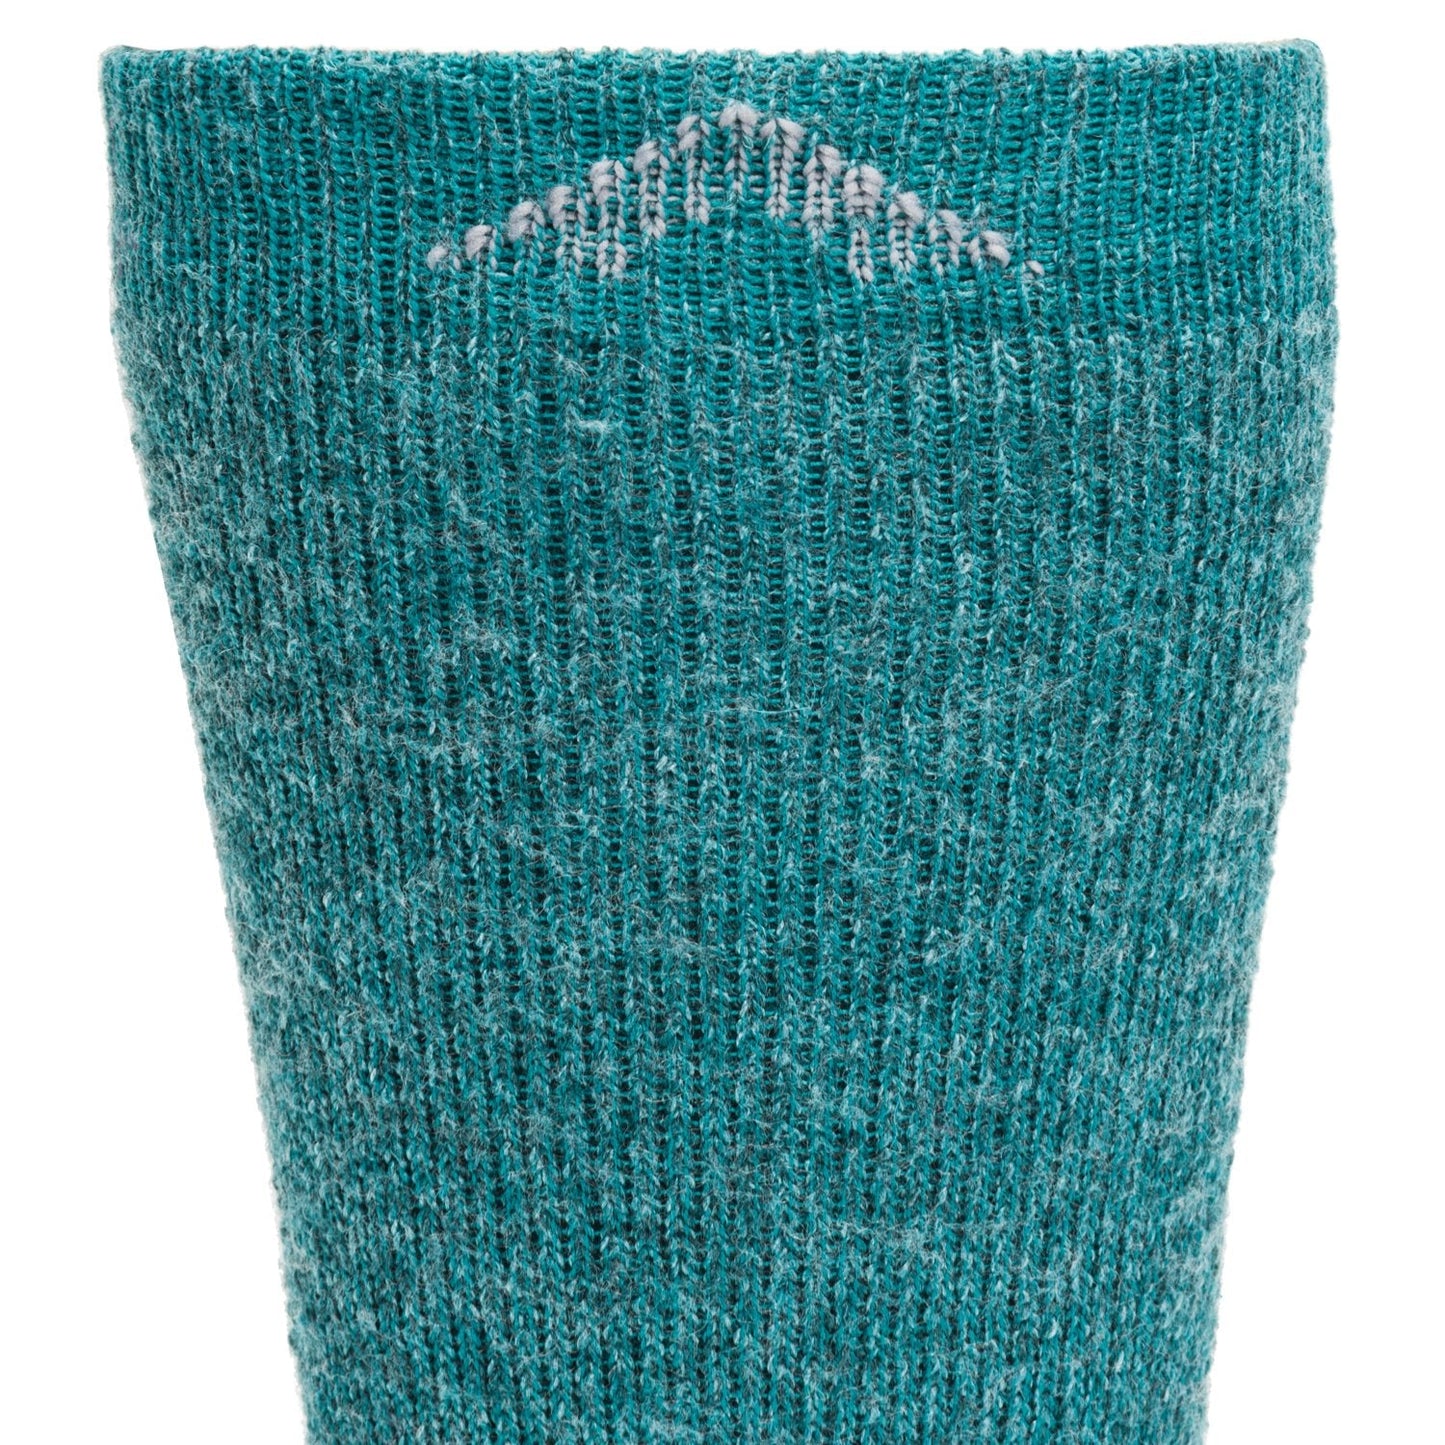 Teal cuff perspective